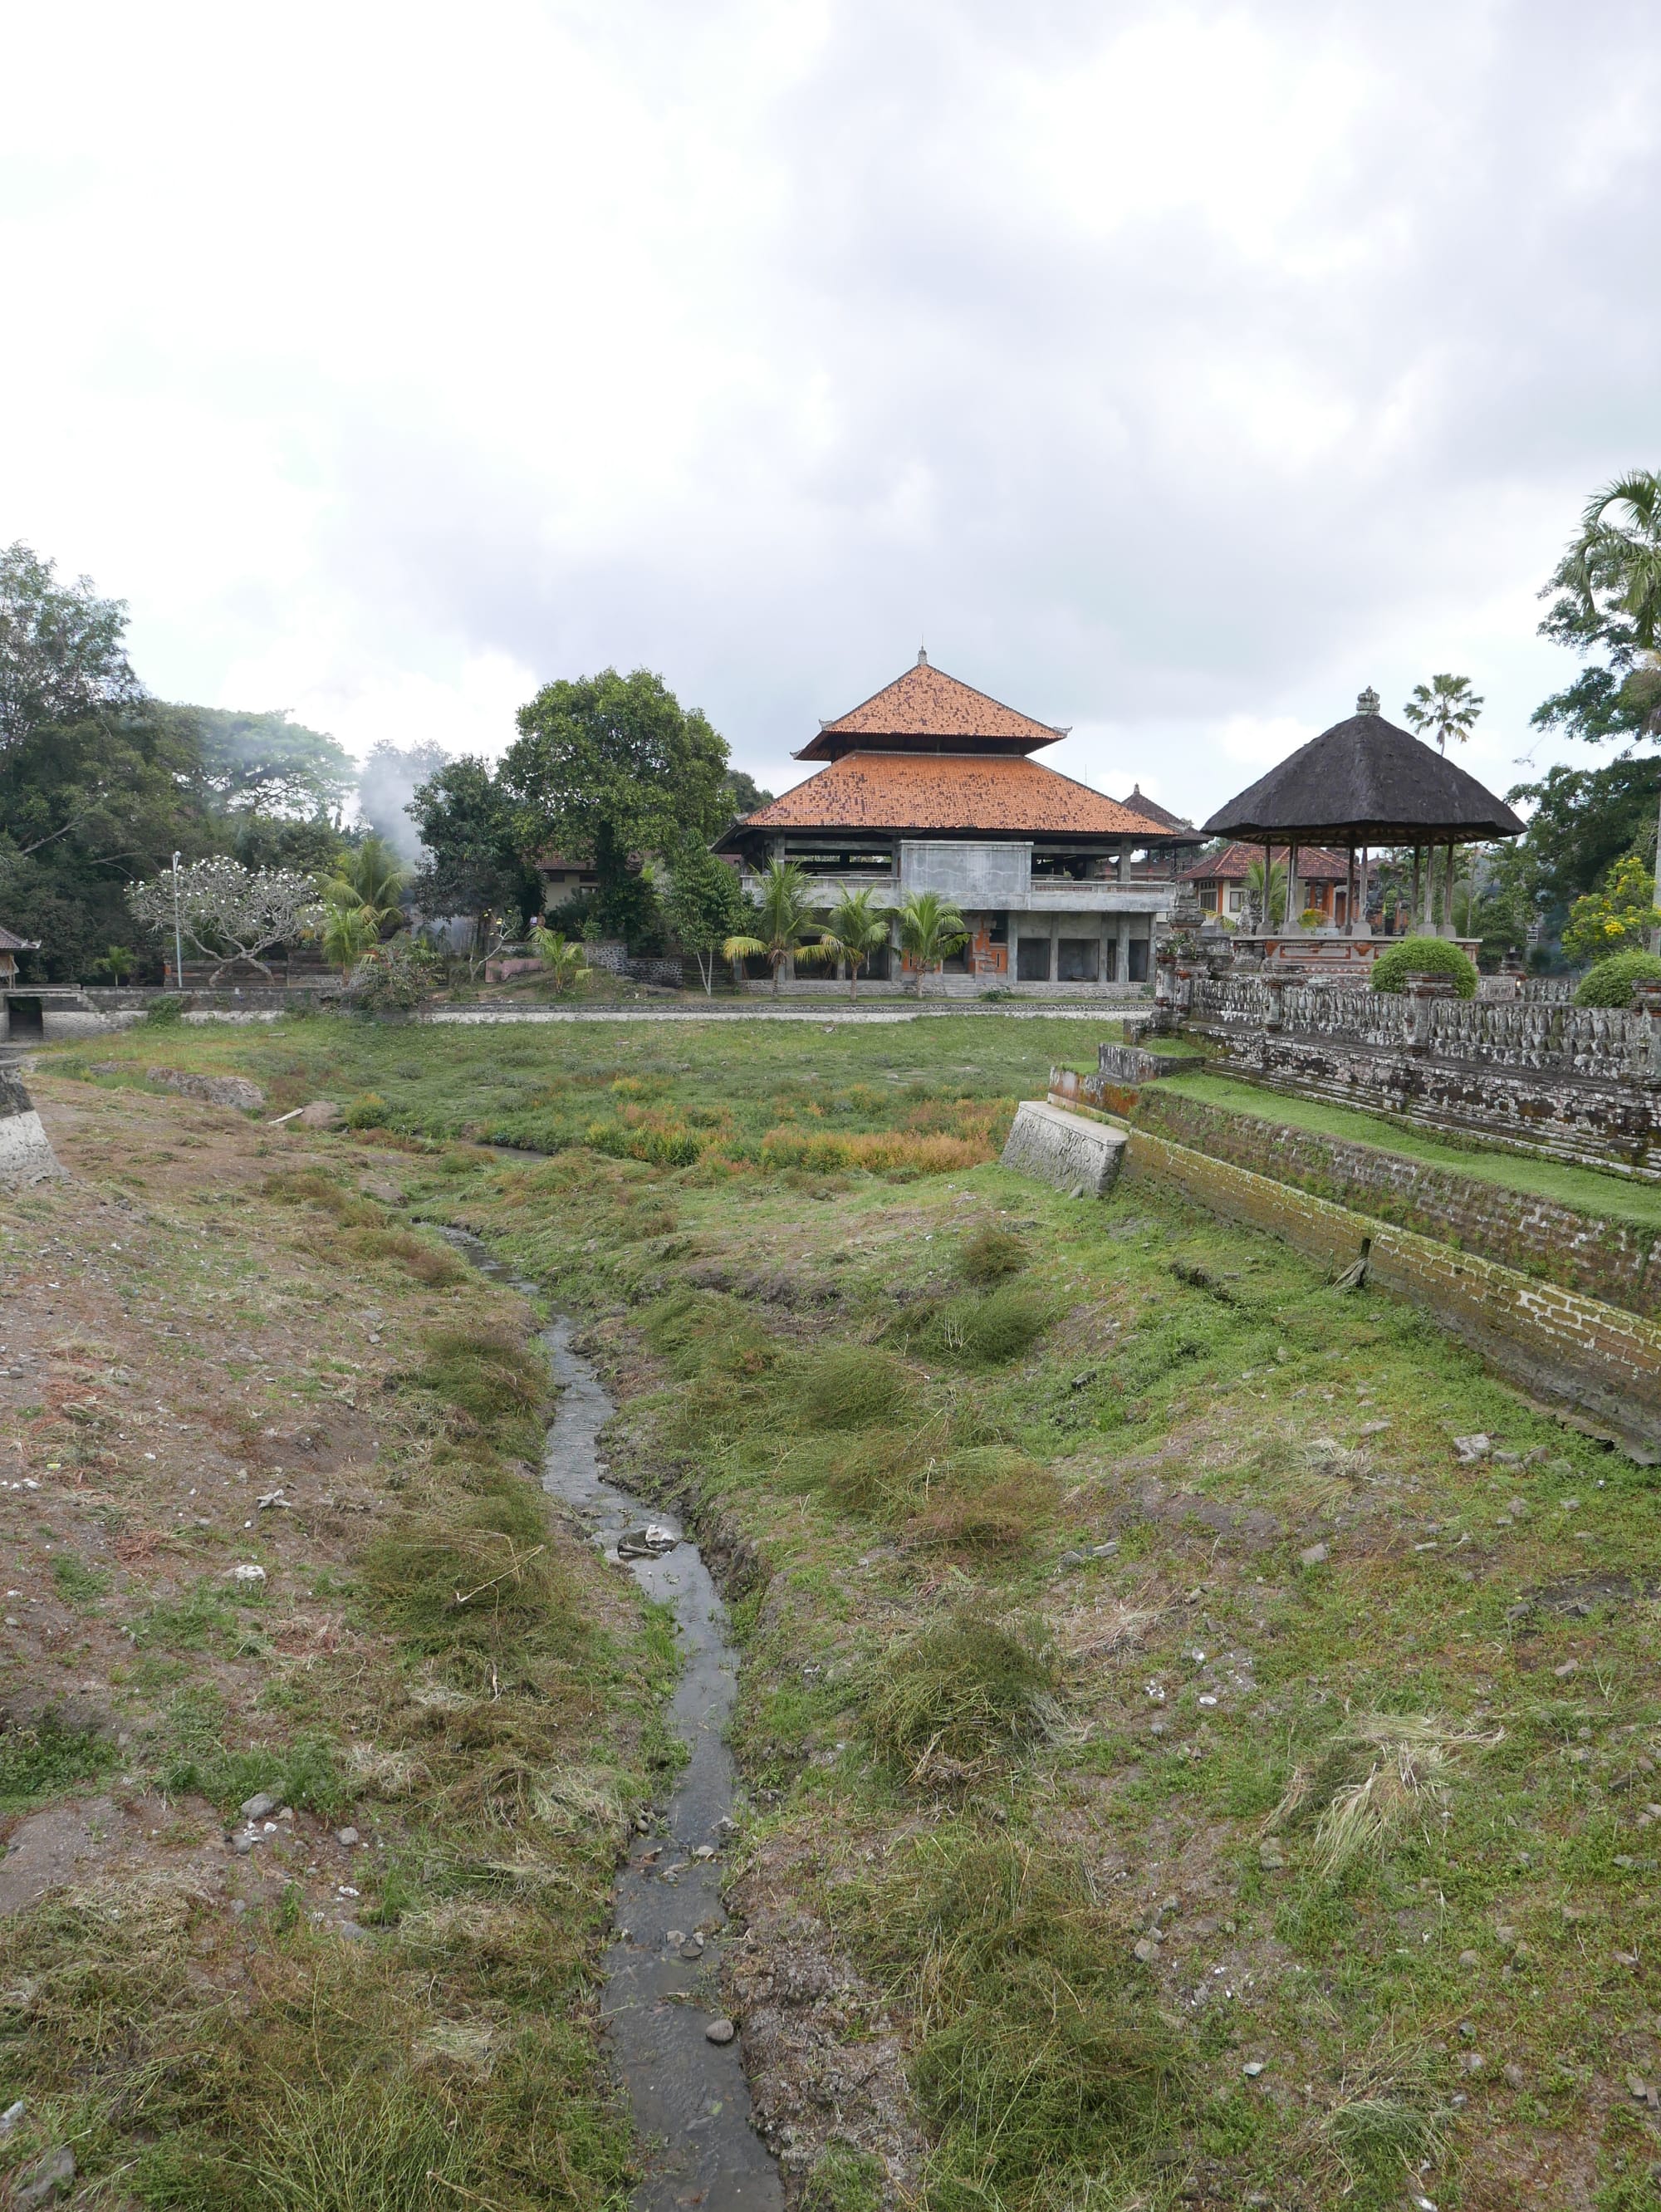 Photo by Author — a dried-up part of the moat at Pura Taman Ayun, Bali, Indonesia — a Royal Water Temple